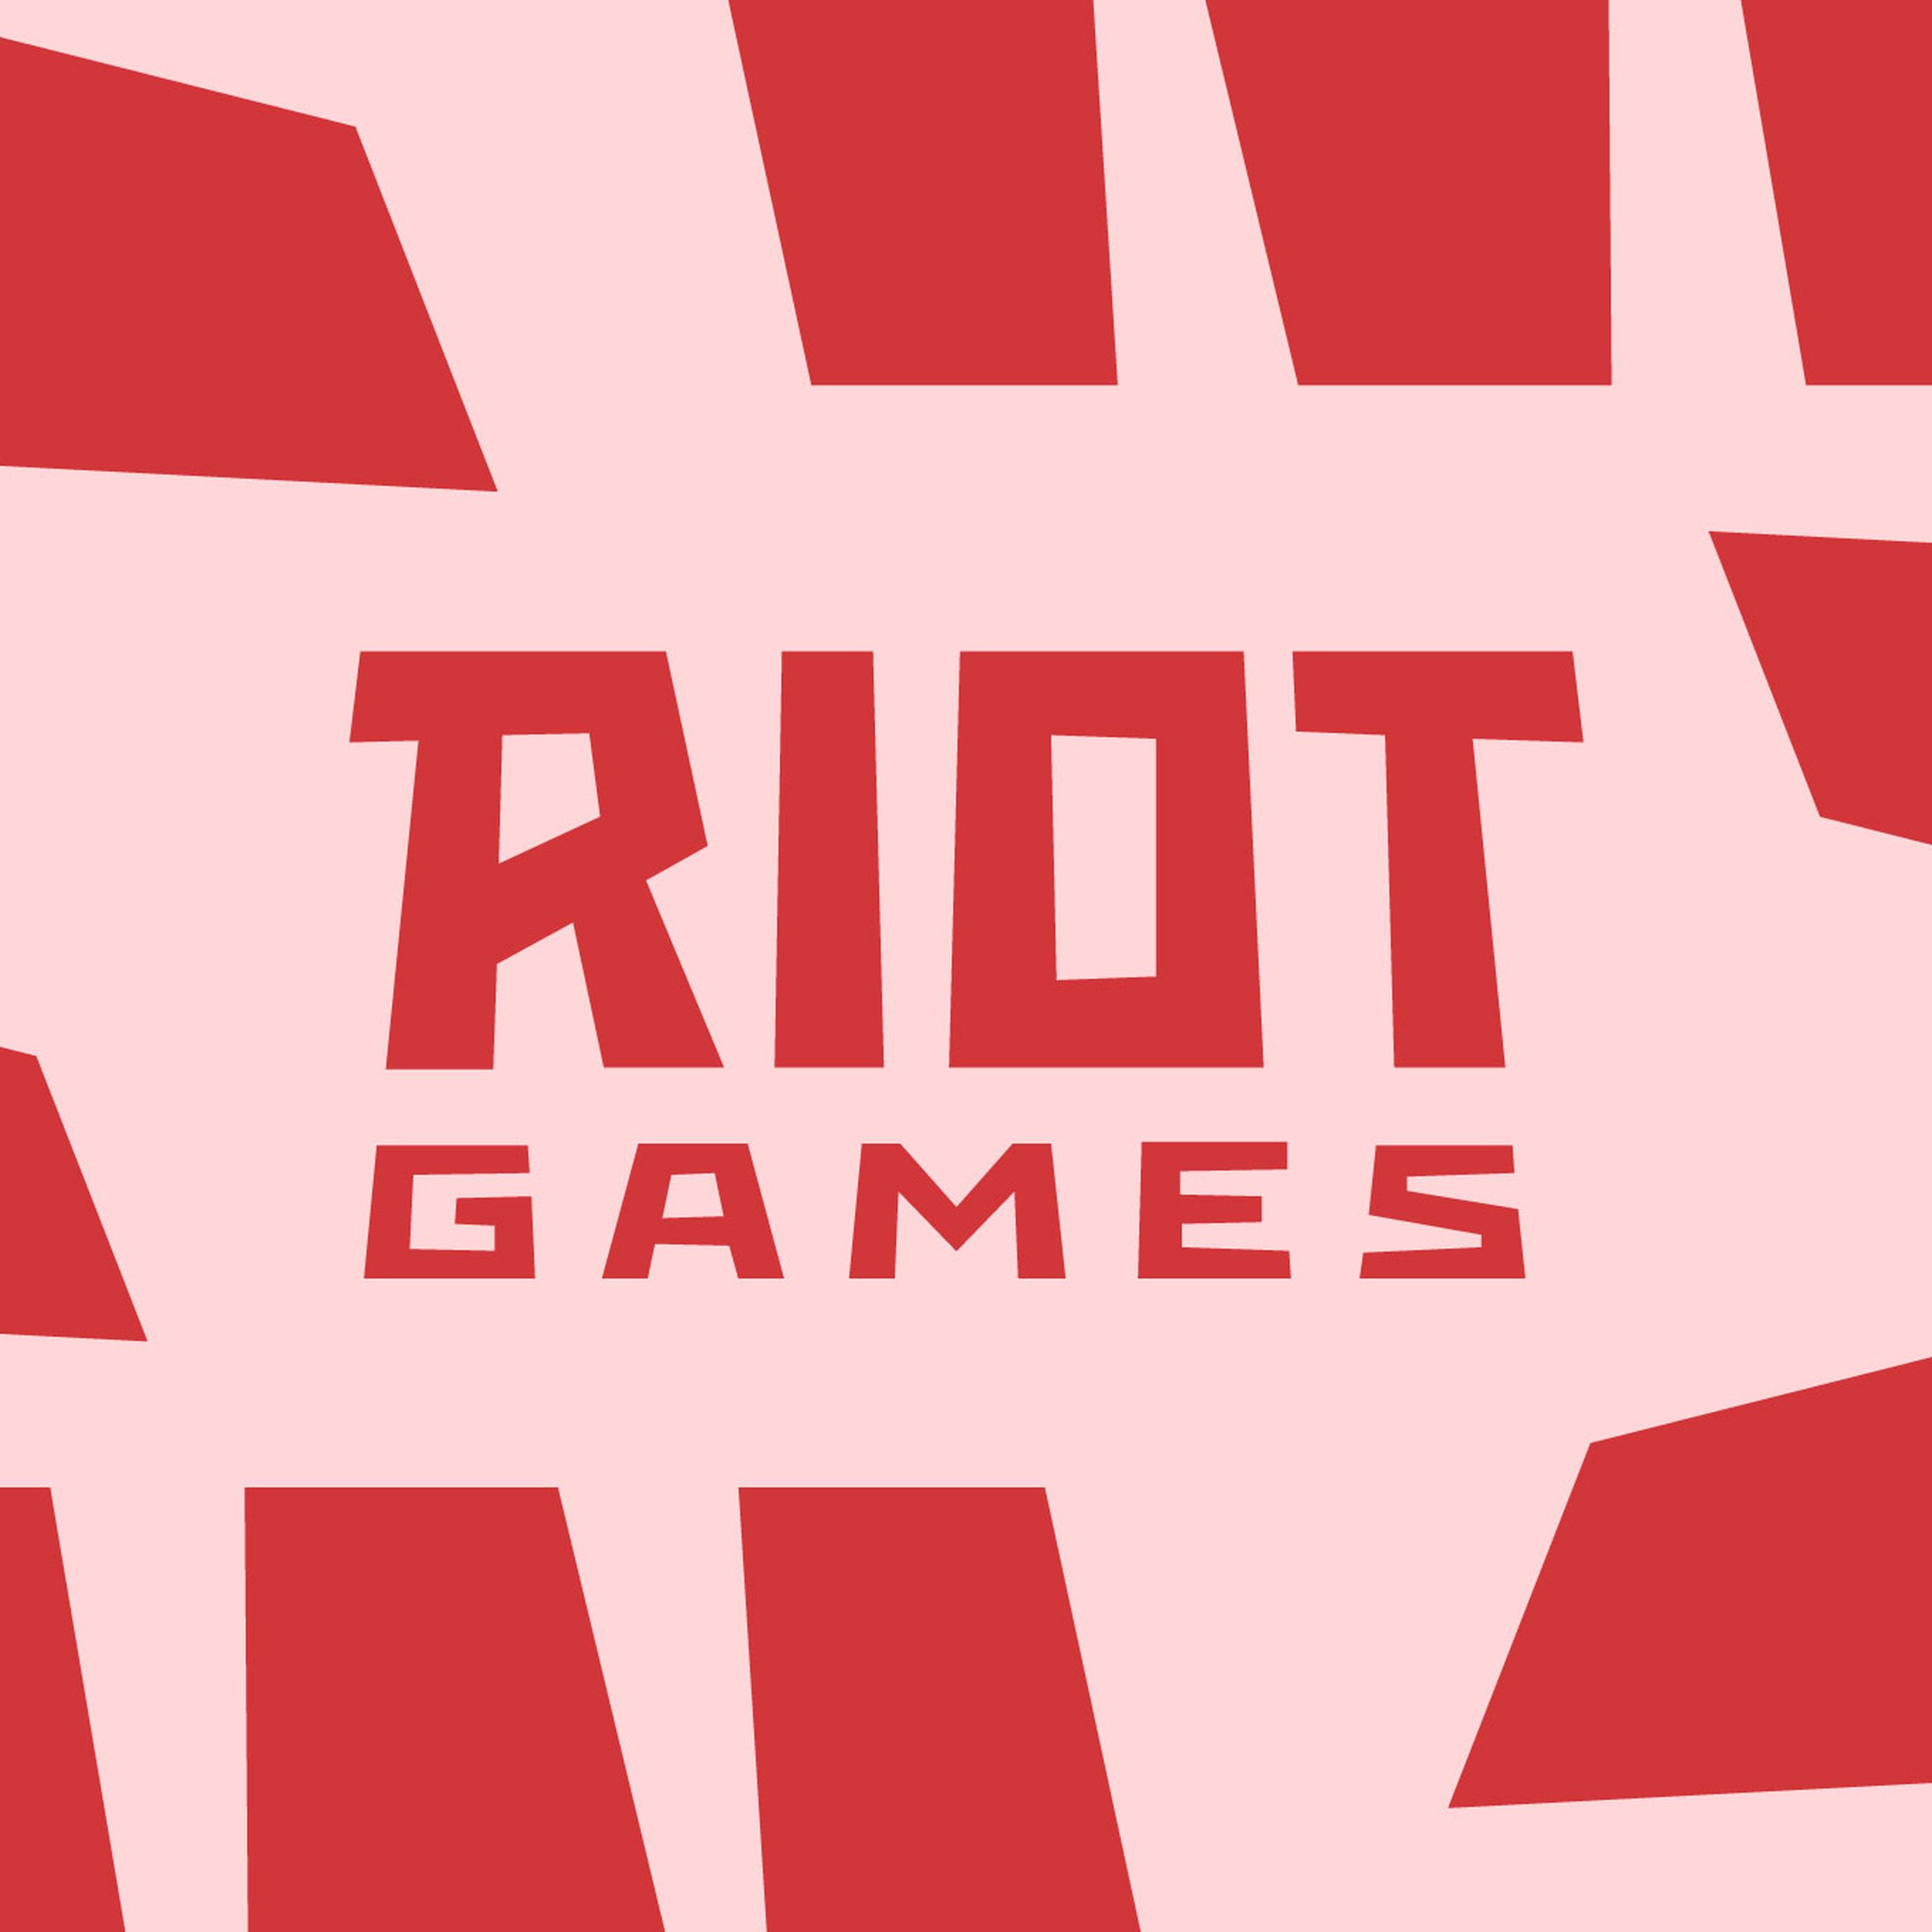 The Riot Games logo on a pink background, surrounded by red blocky shapes.